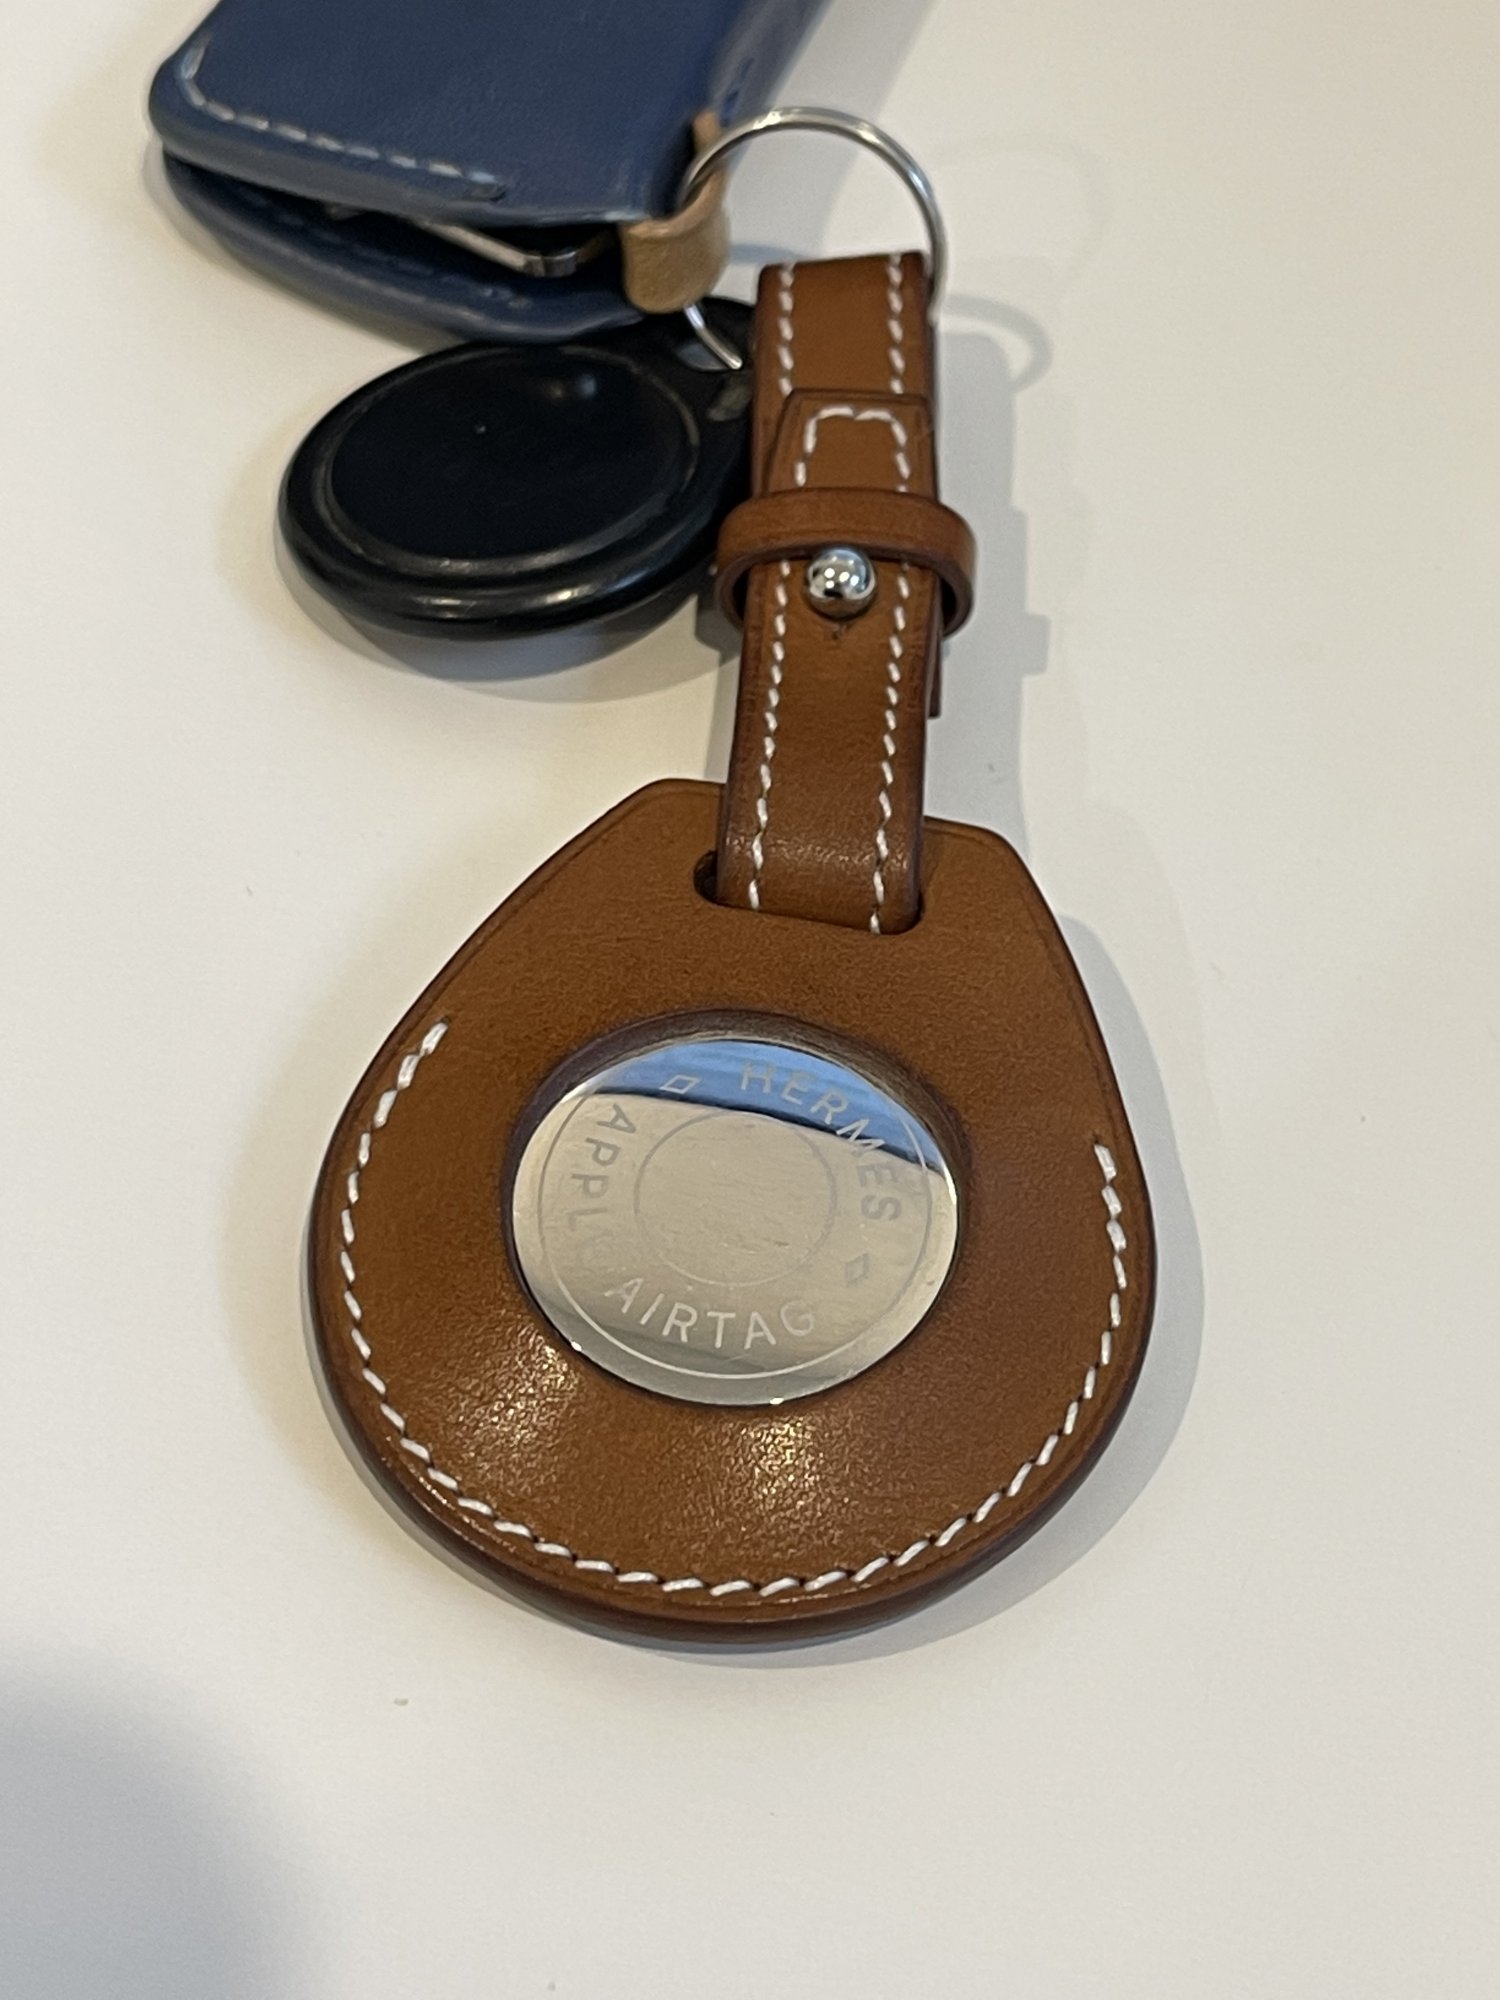 Hermès AirTag Edition Owners Thread, Page 2